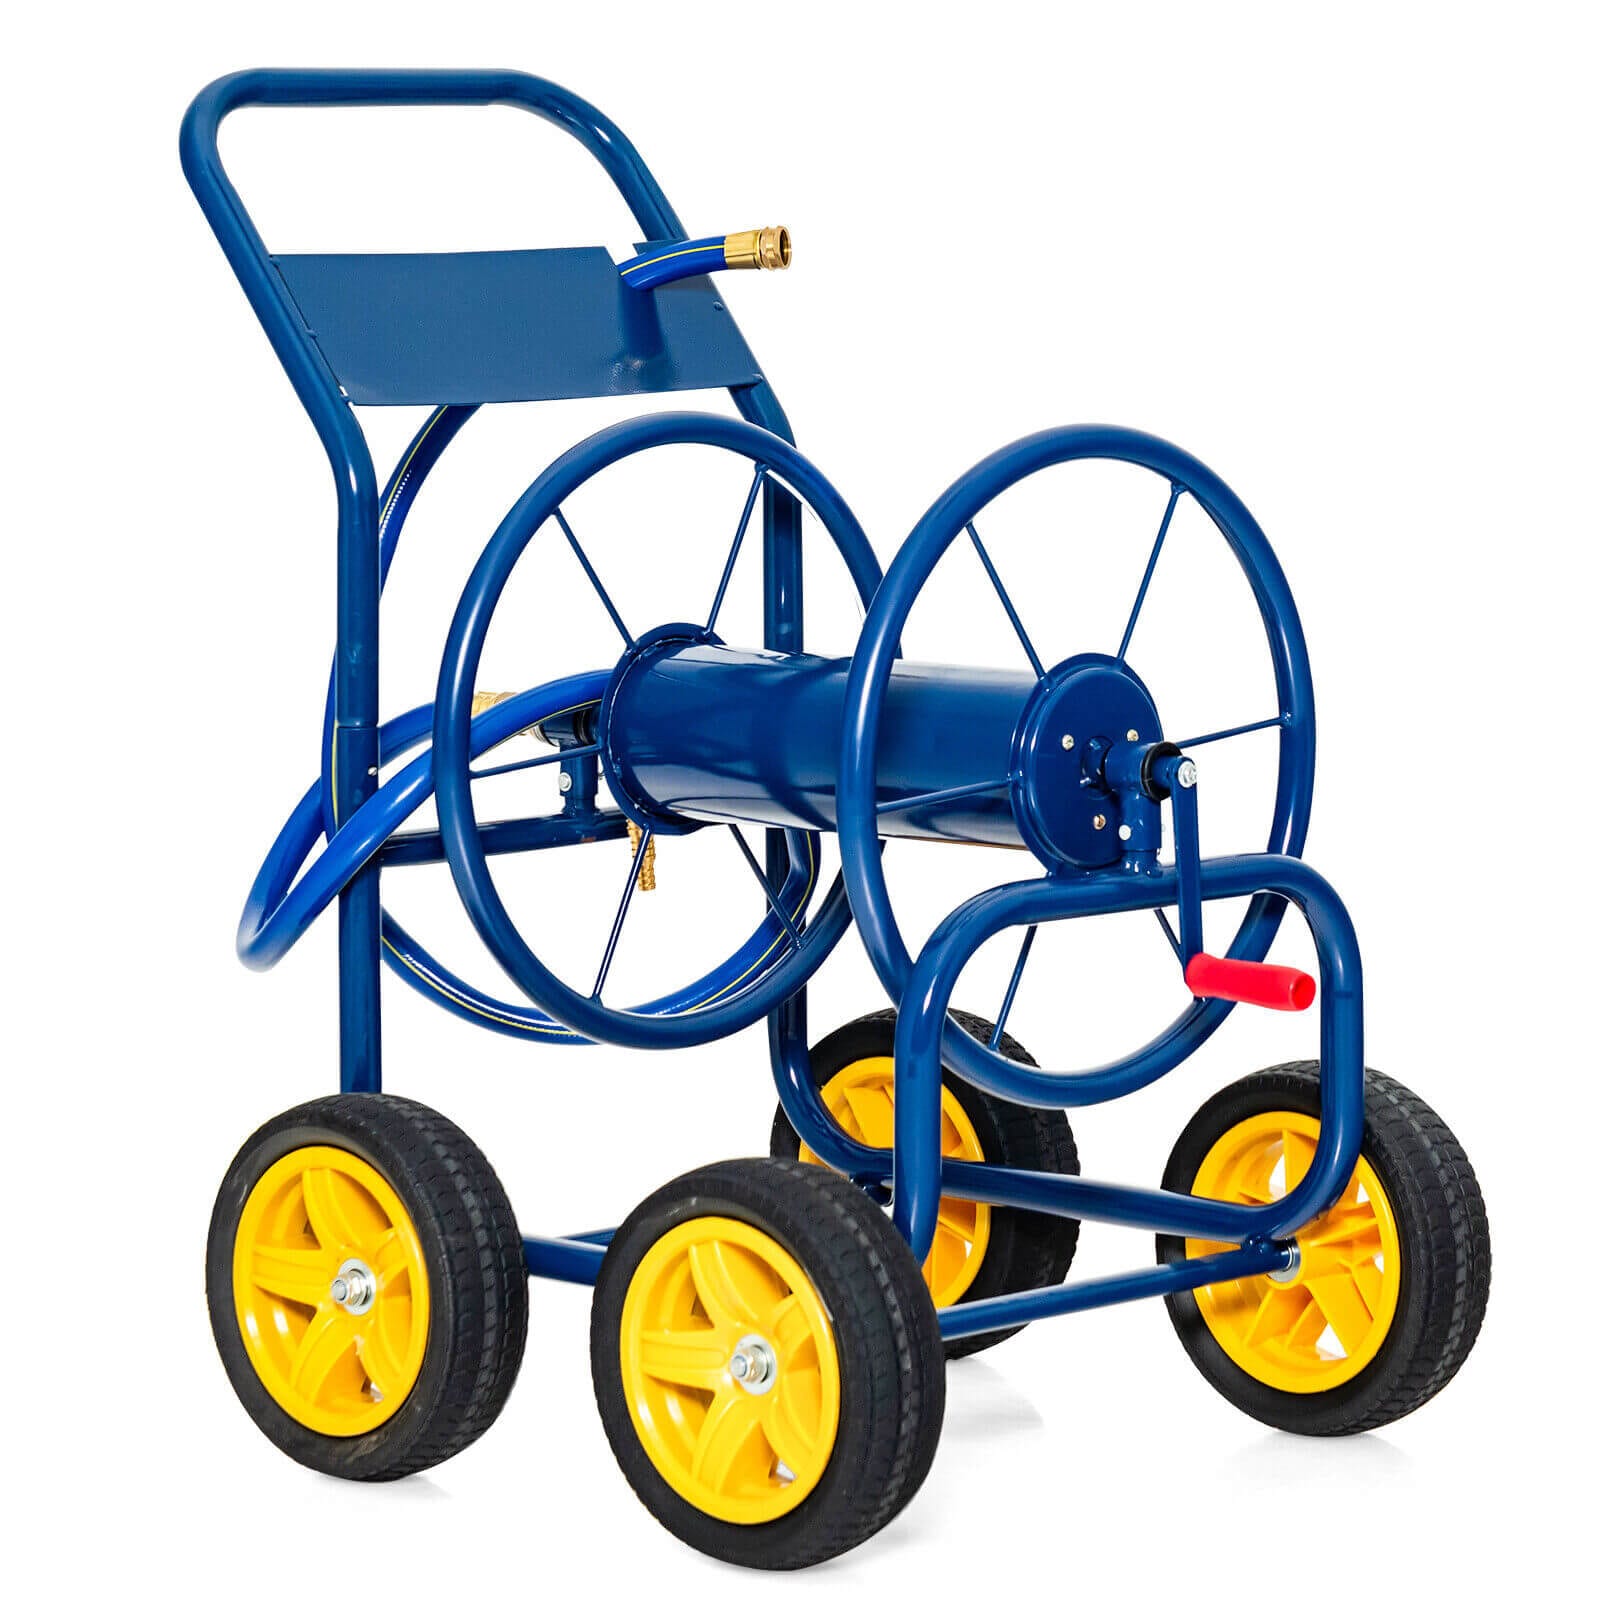 WELLFOR Blue Plastic Garden Hose Reel Cart with Hose Guide - 330ft  Capacity, Manual Operation, Portable Design in the Garden Hose Reels  department at